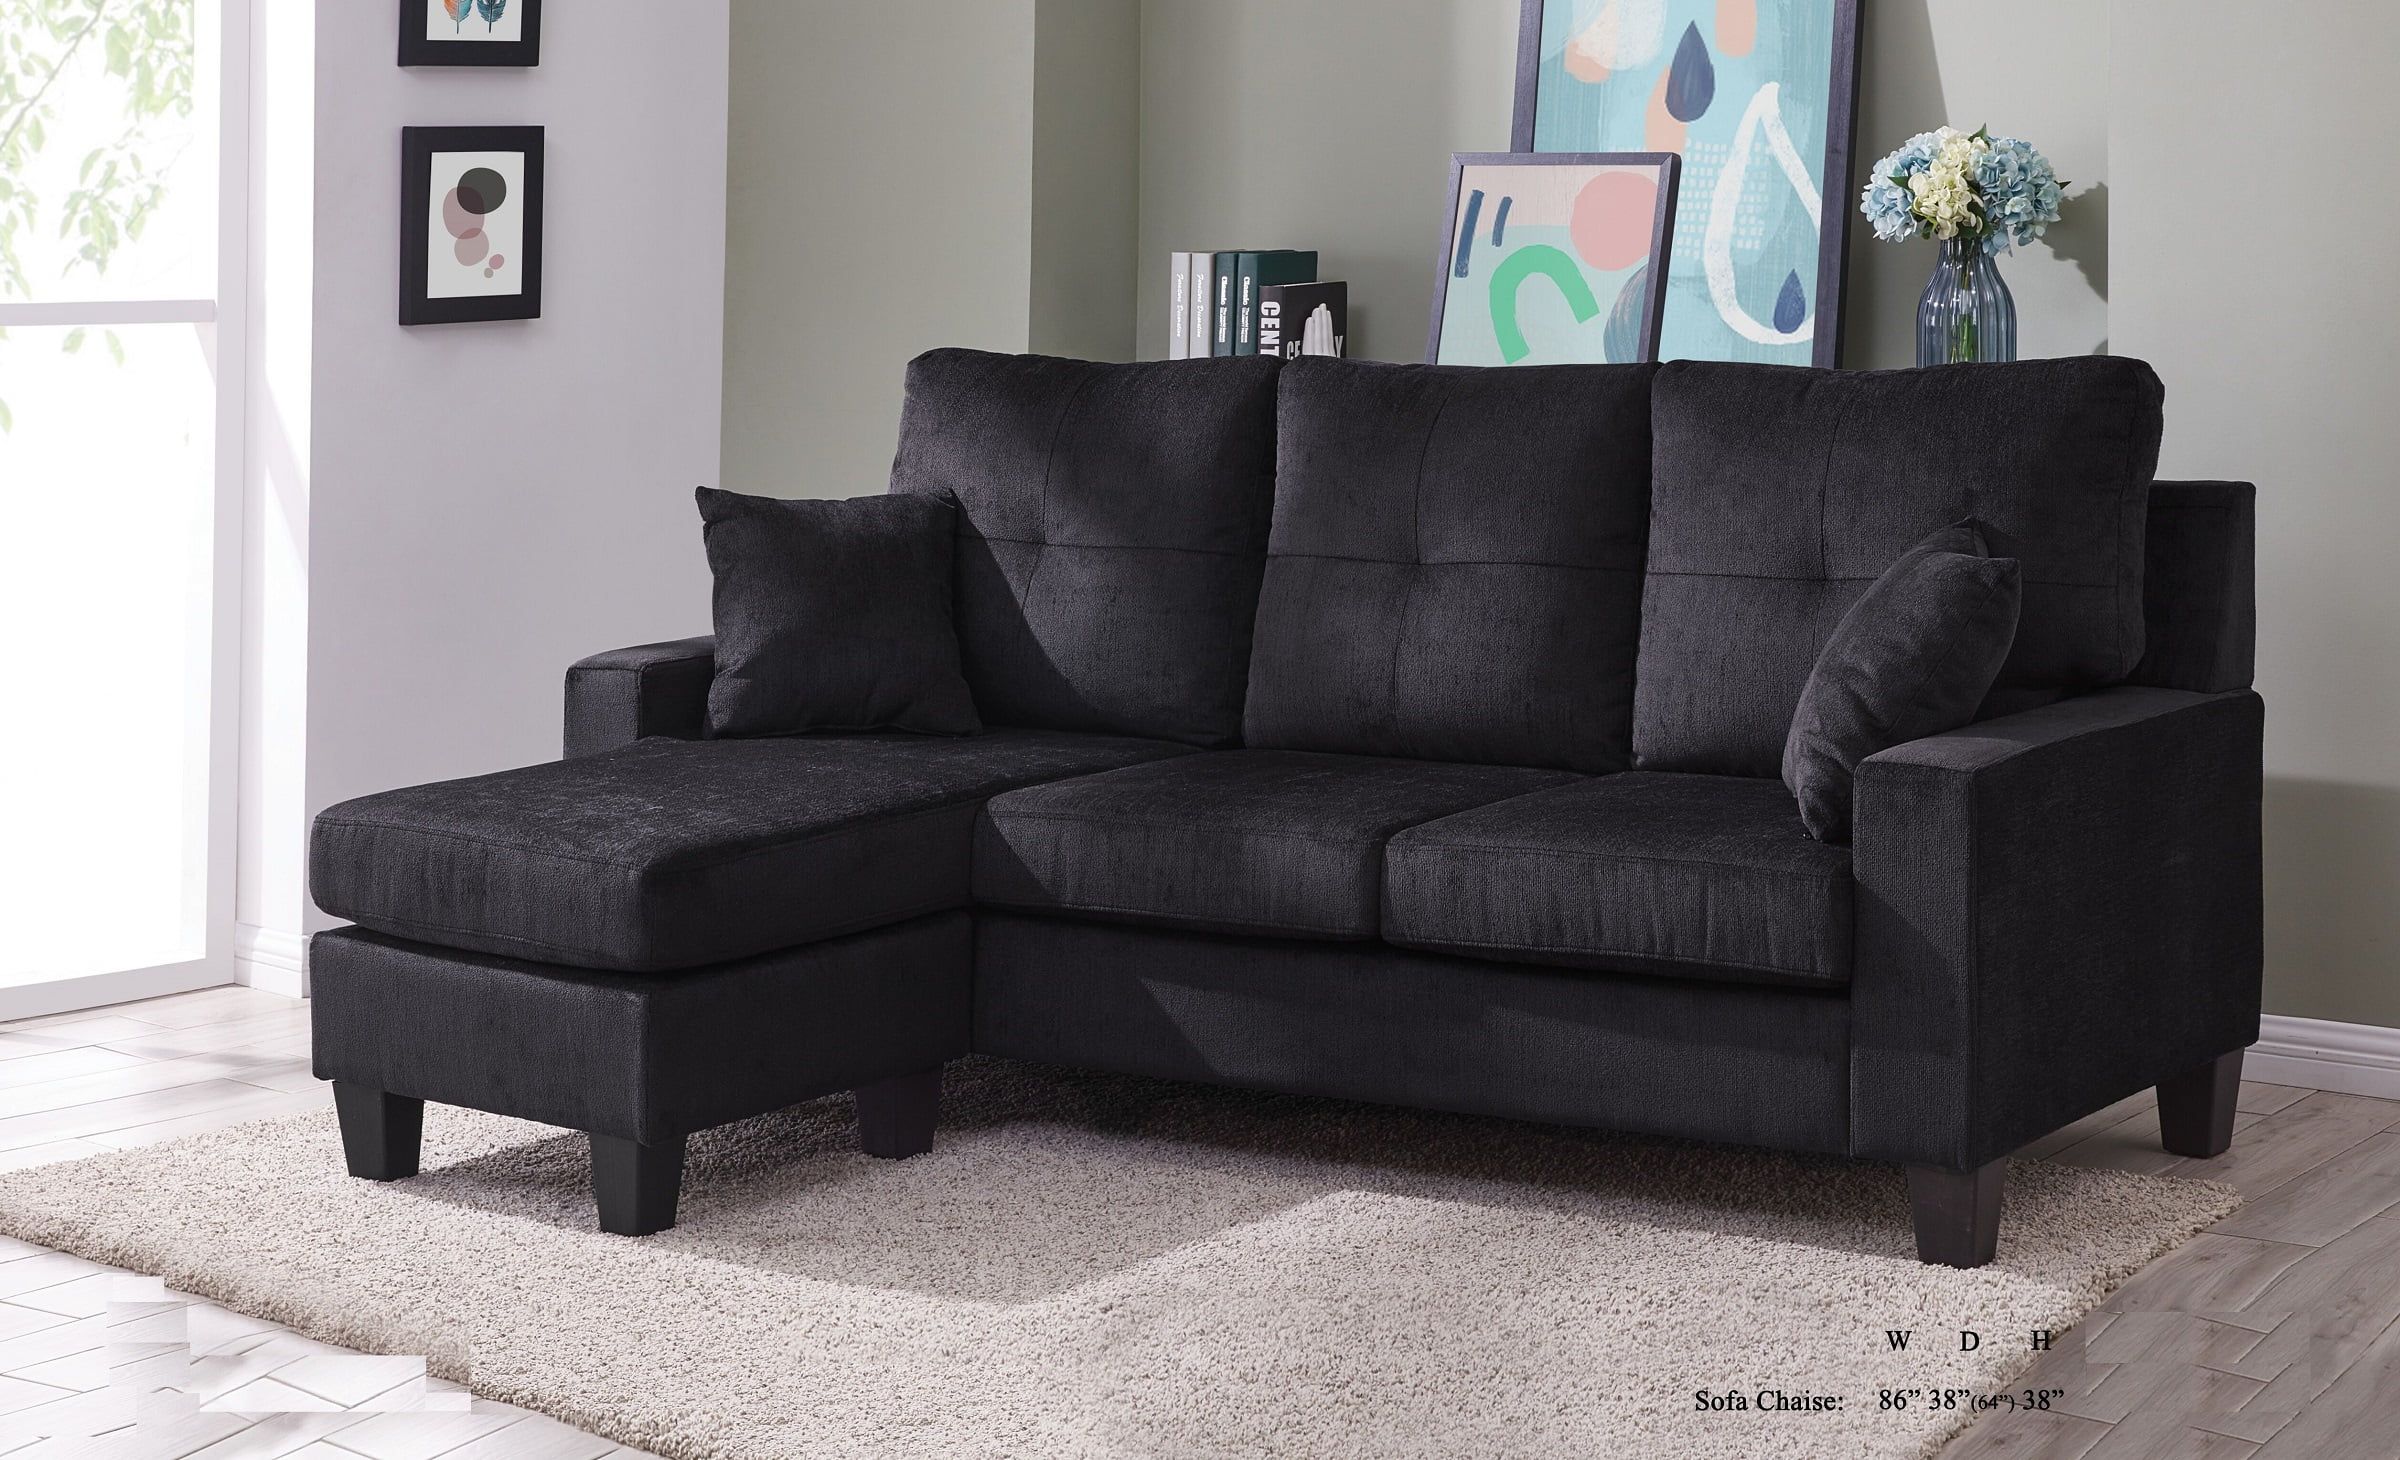 Sectional Sofa Set Black Fabric Tufted Cushion Sofa Chaise Small Space Pertaining To Sofas In Black (Gallery 12 of 20)